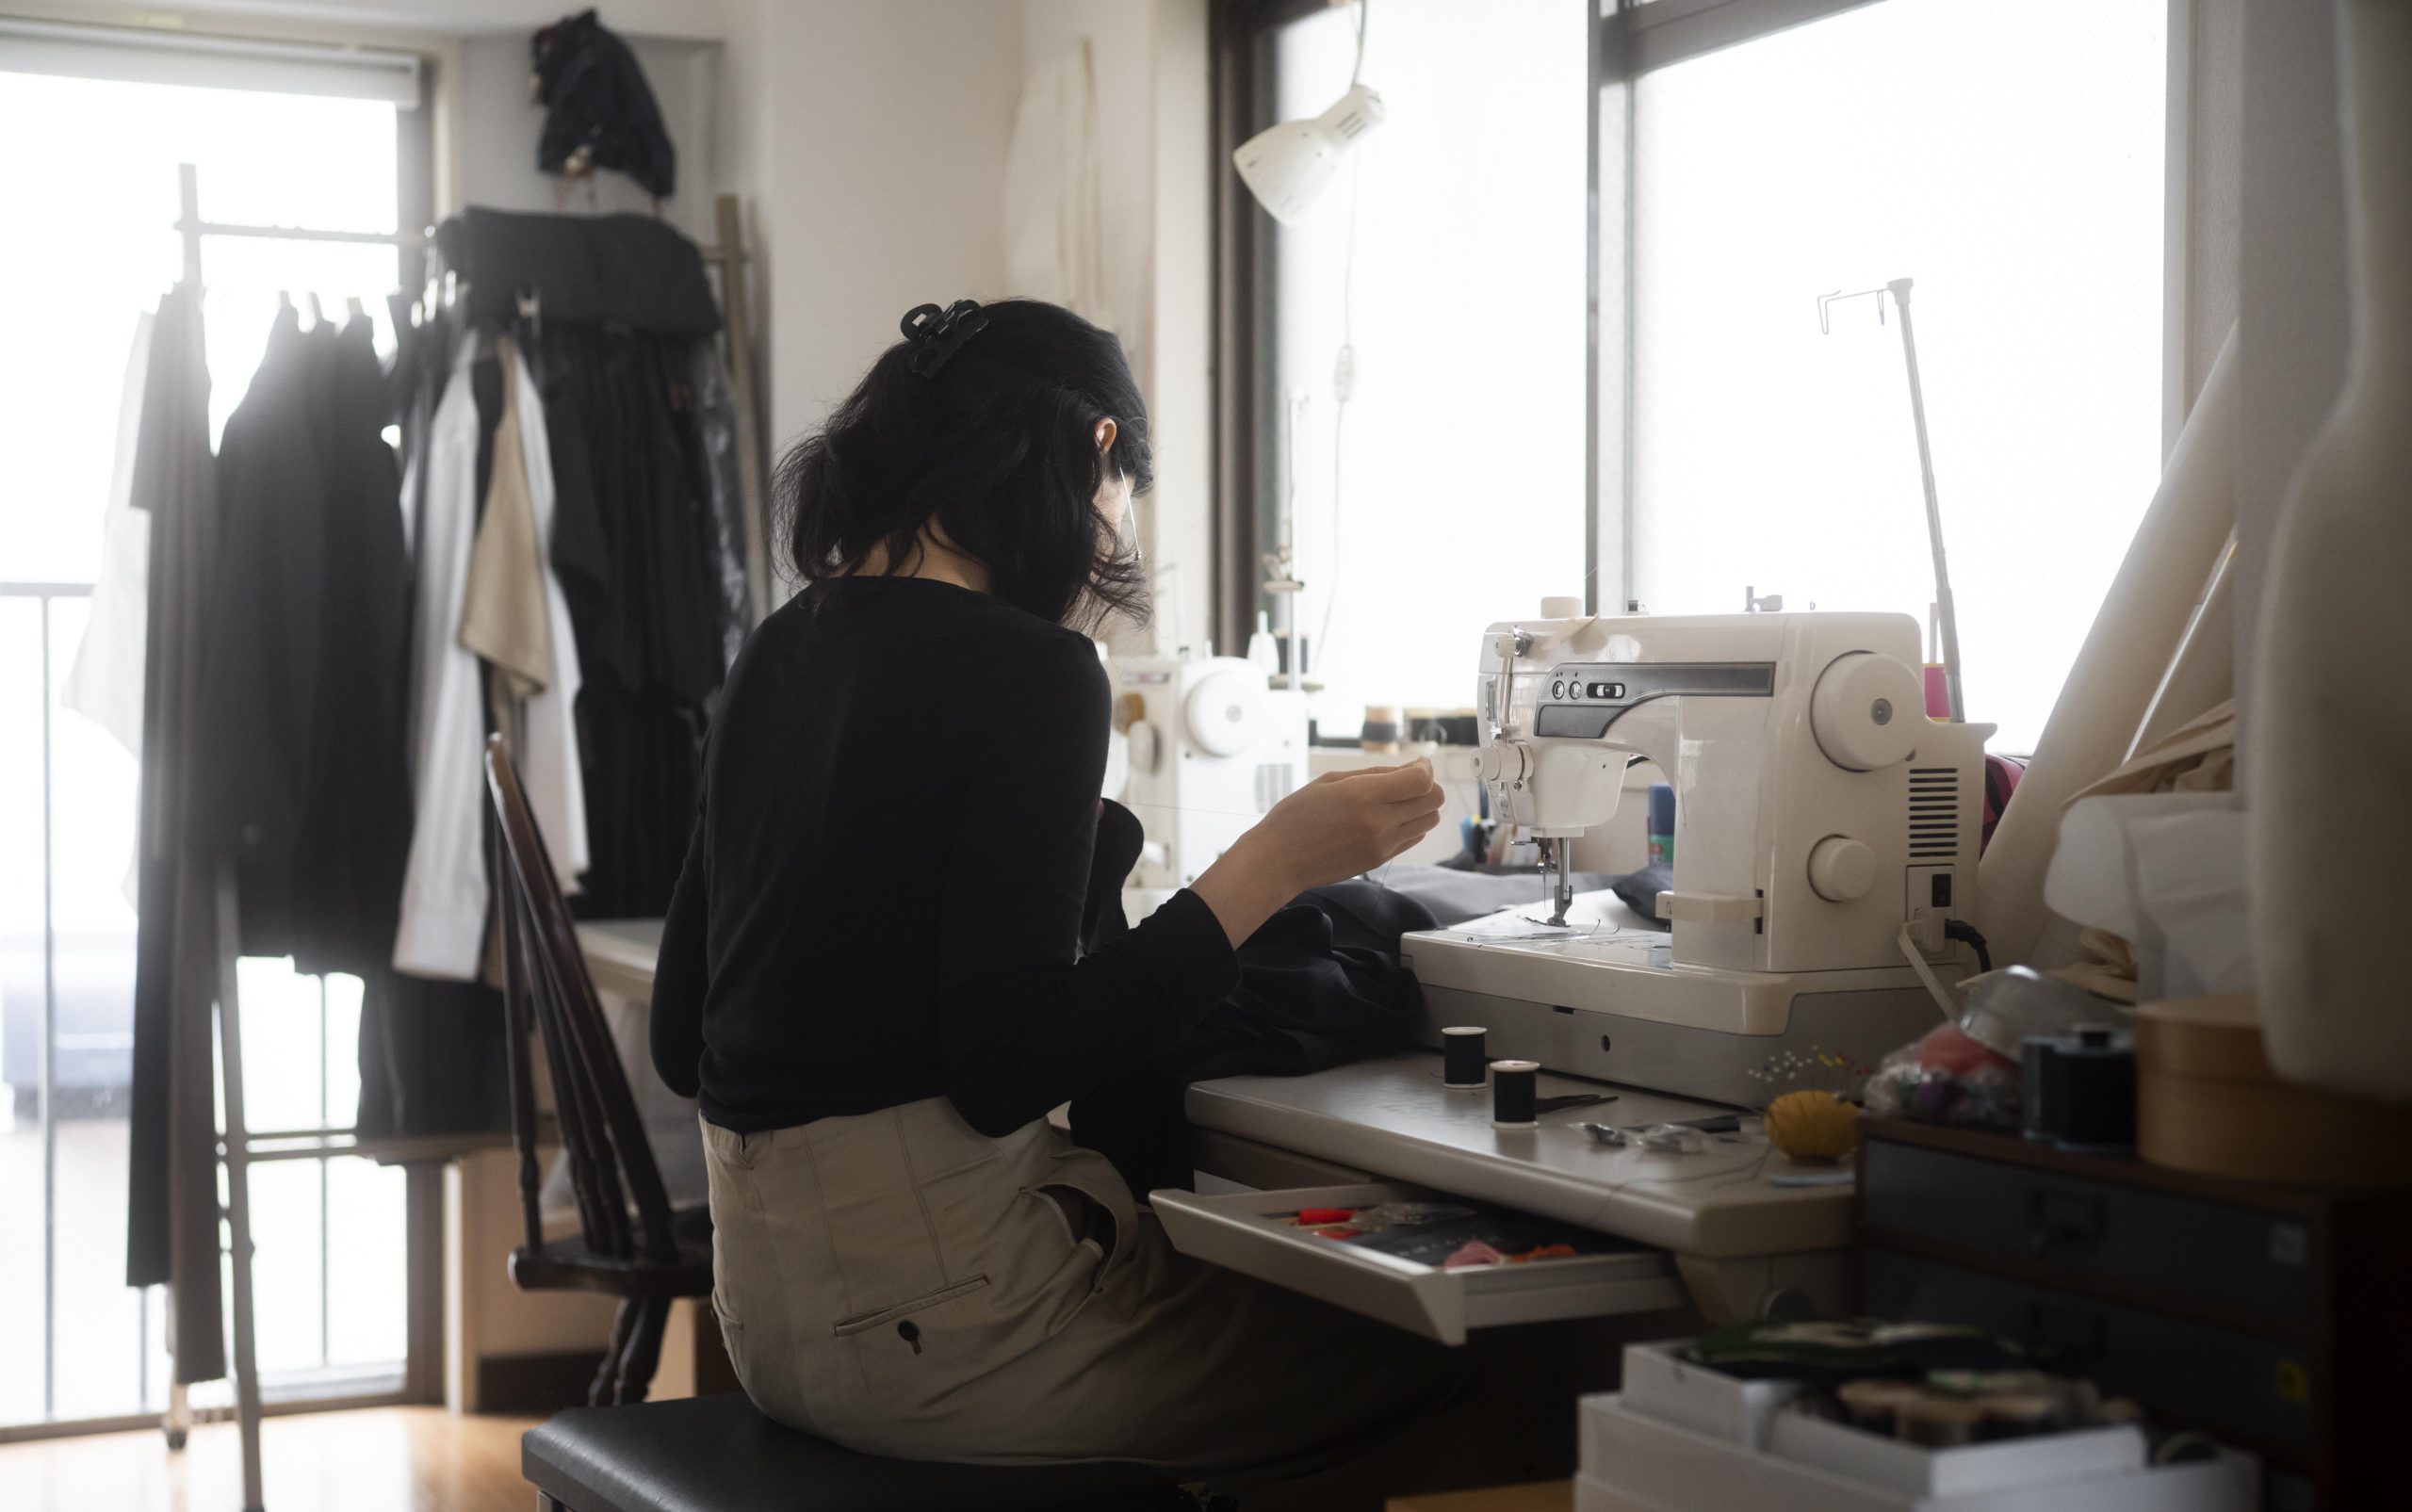 Women entrepreneurs changing the face of fashion and textile industry